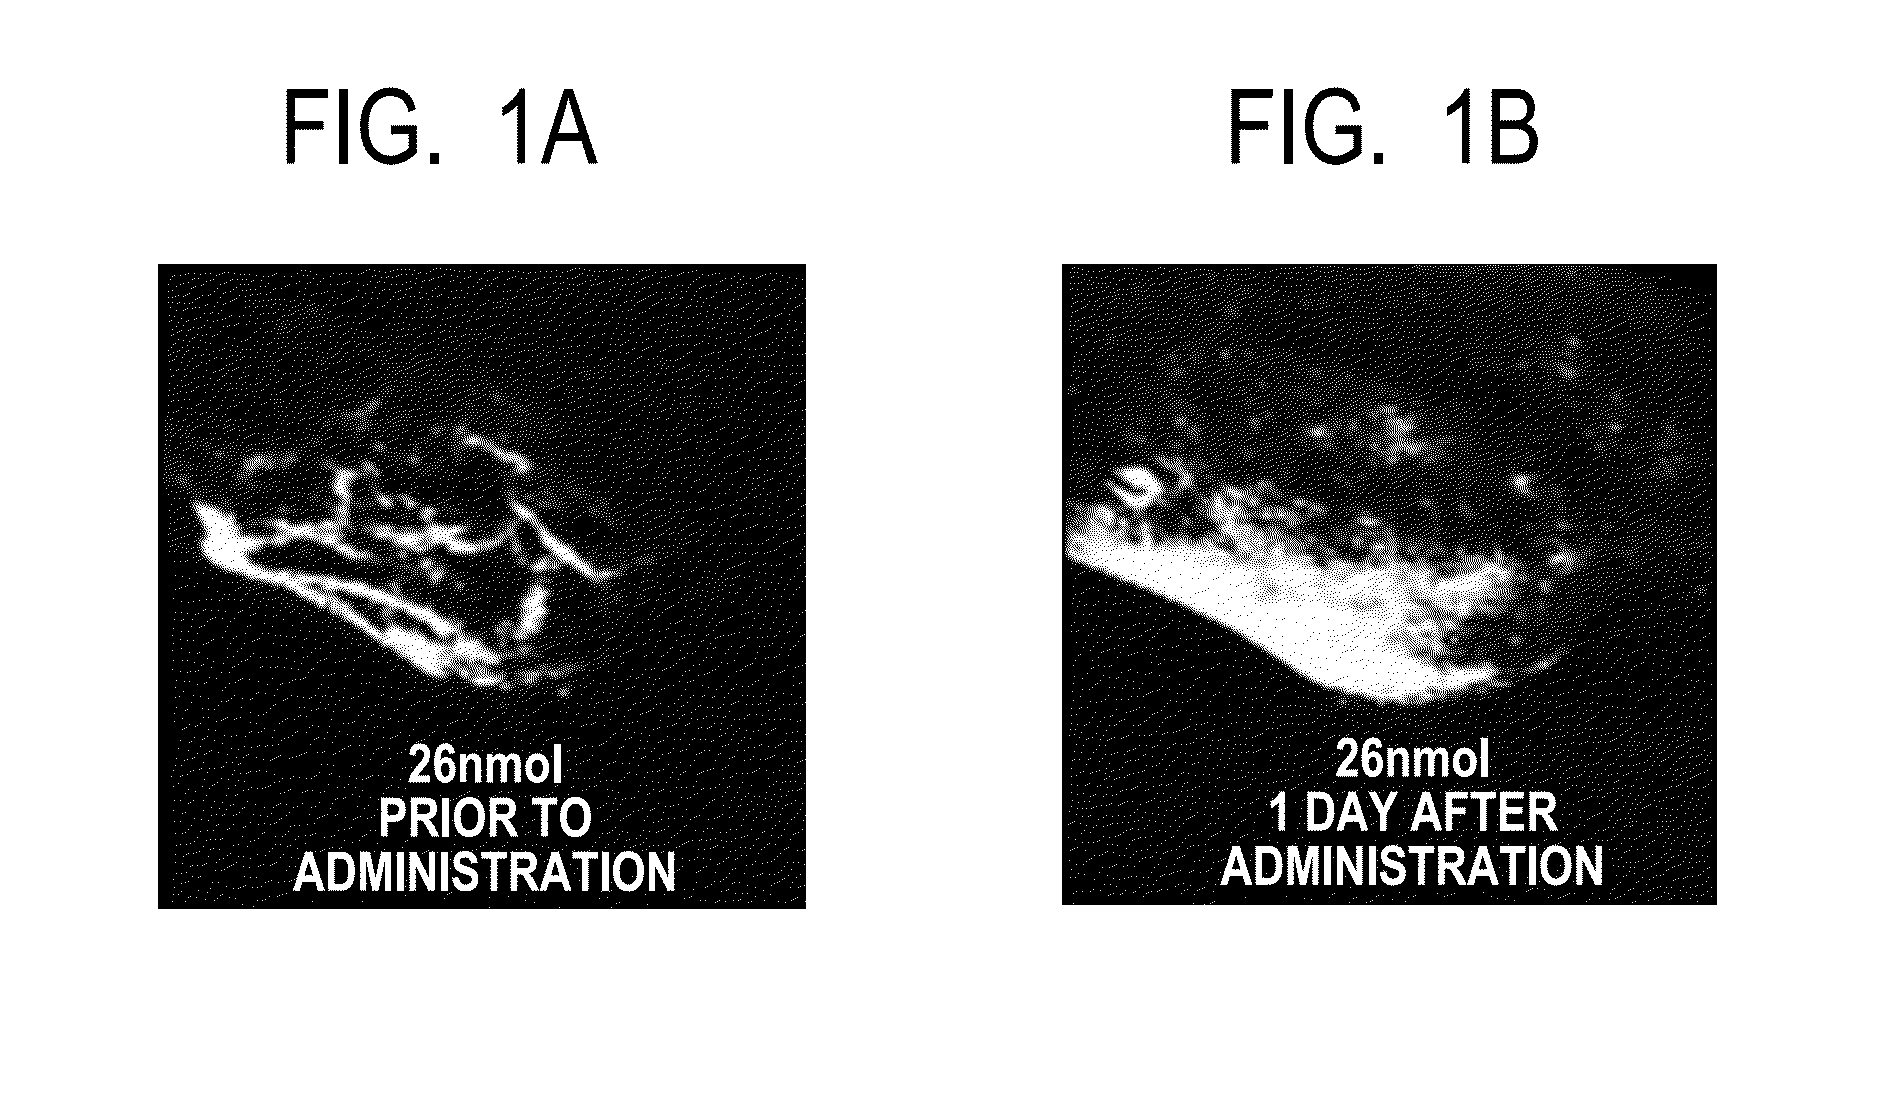 Dye-containing nanoparticle for photoacoustic contrast agent